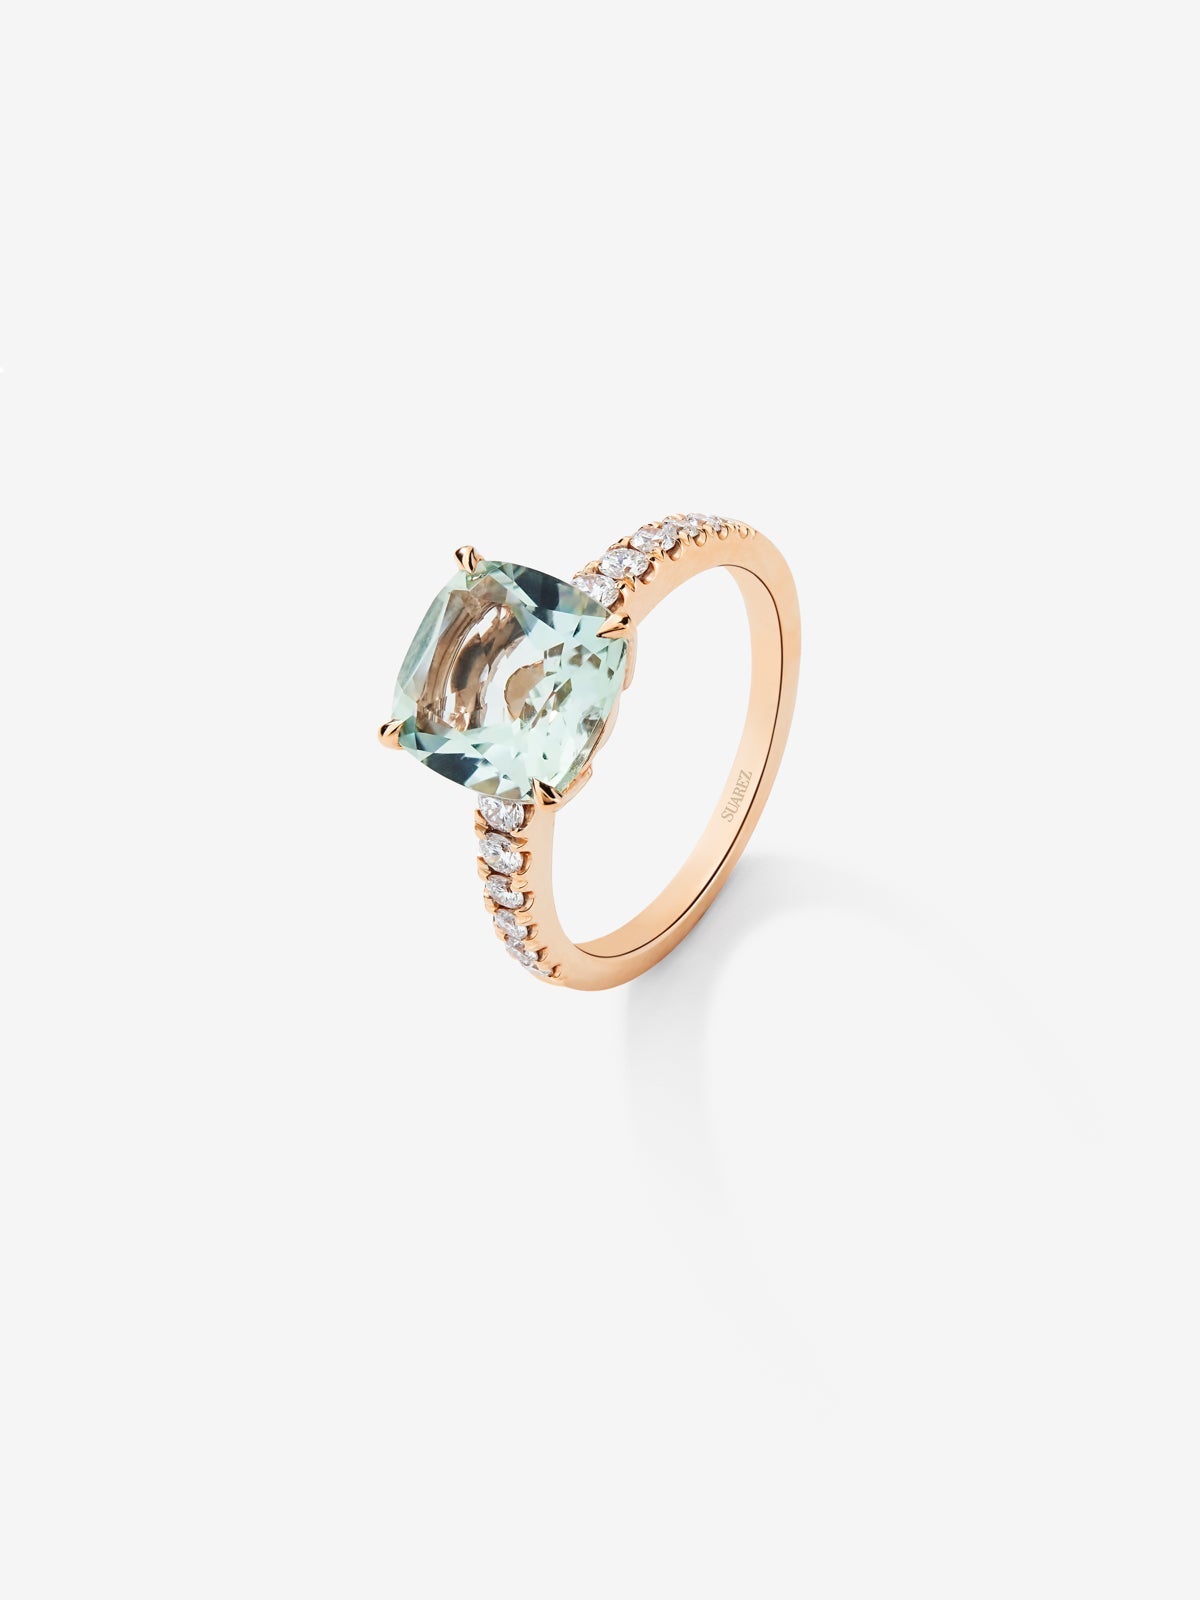 18K rose gold ring with cushion-cut green amethyst of 2.68 cts and 12 brilliant-cut diamonds with a total of 0.29 cts